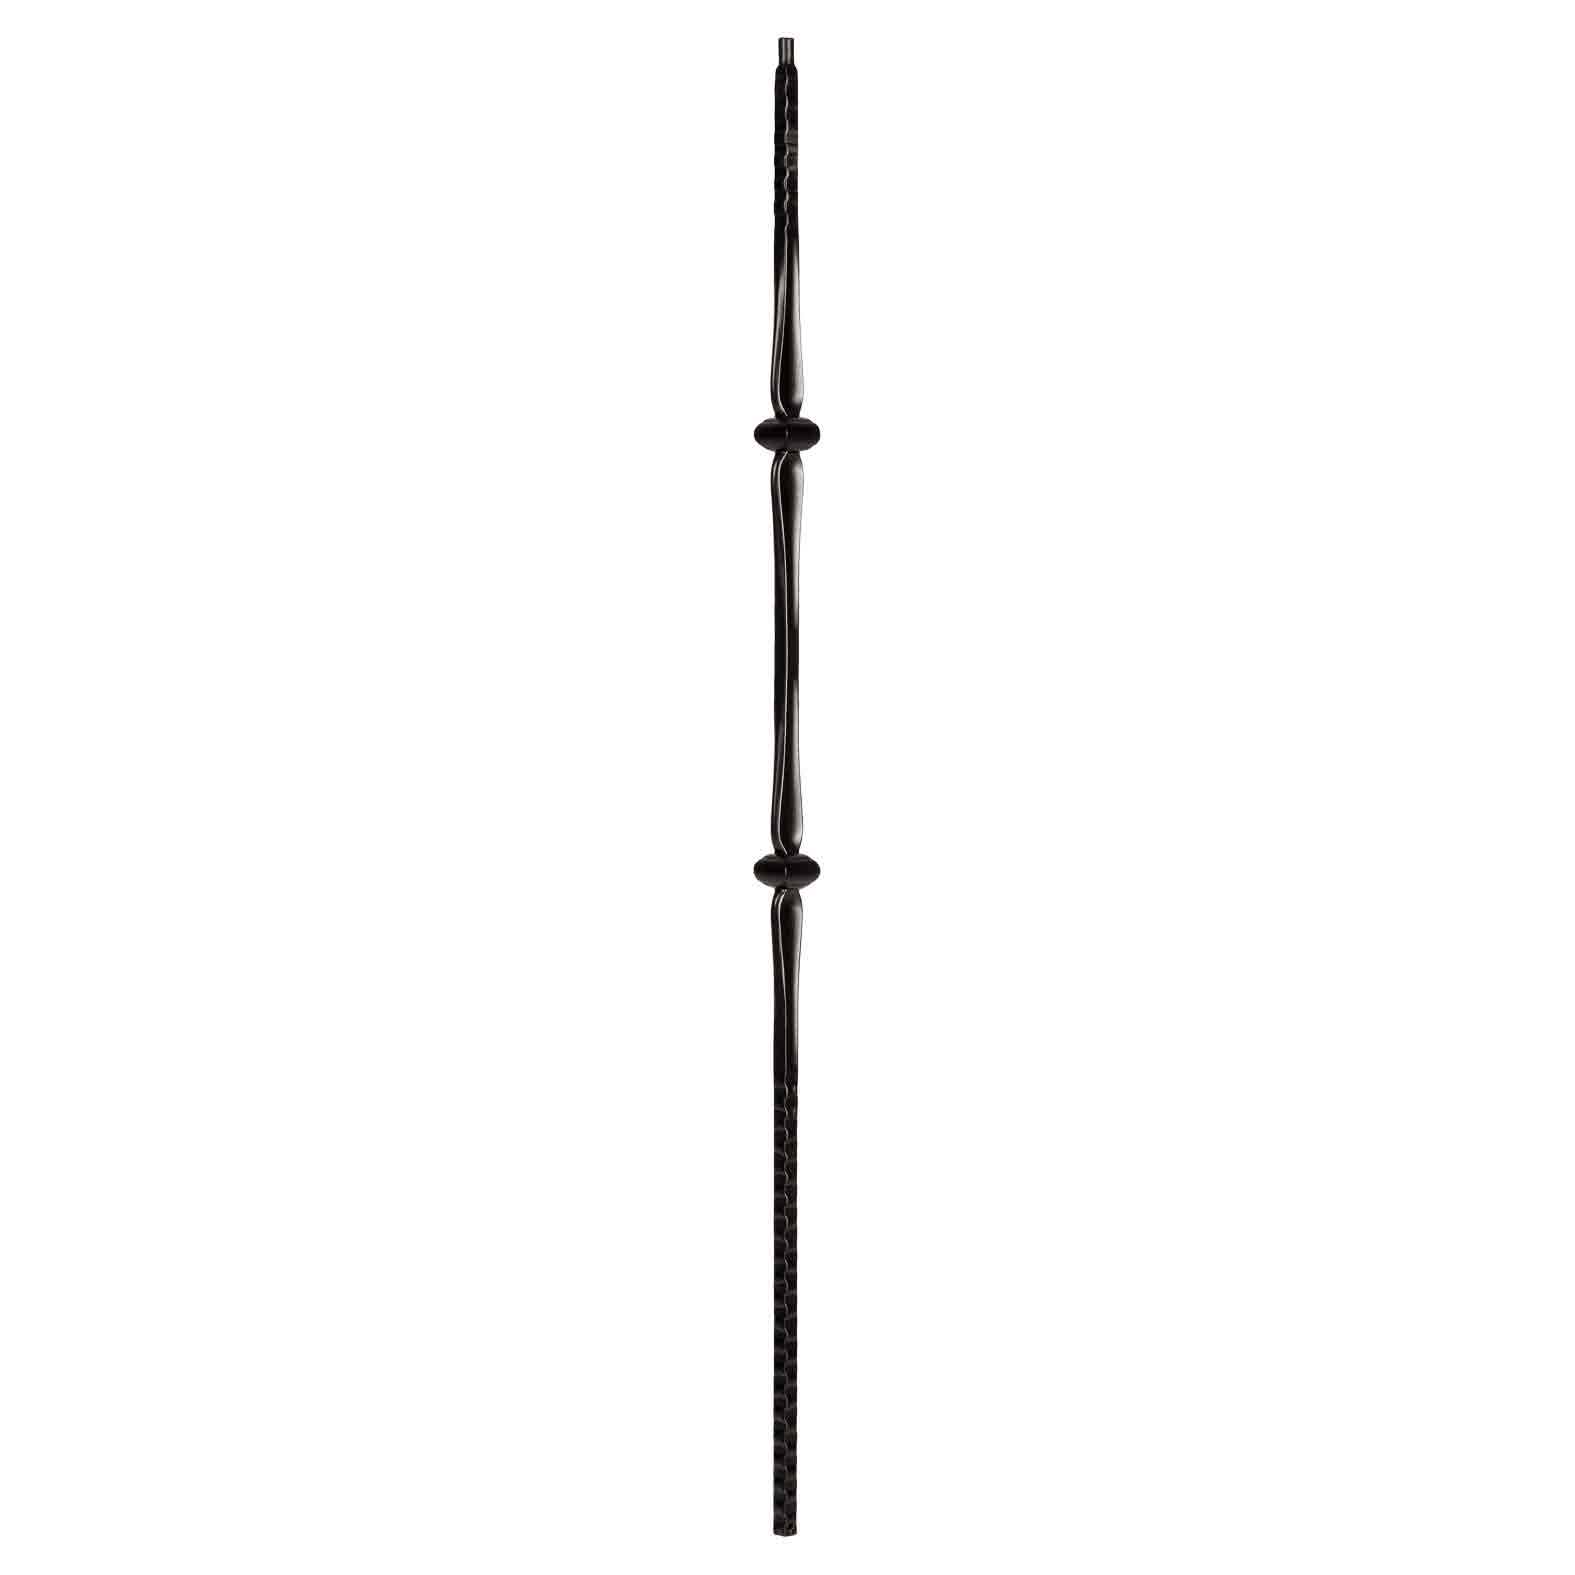 lih-HOL15044 double knuckle baluster